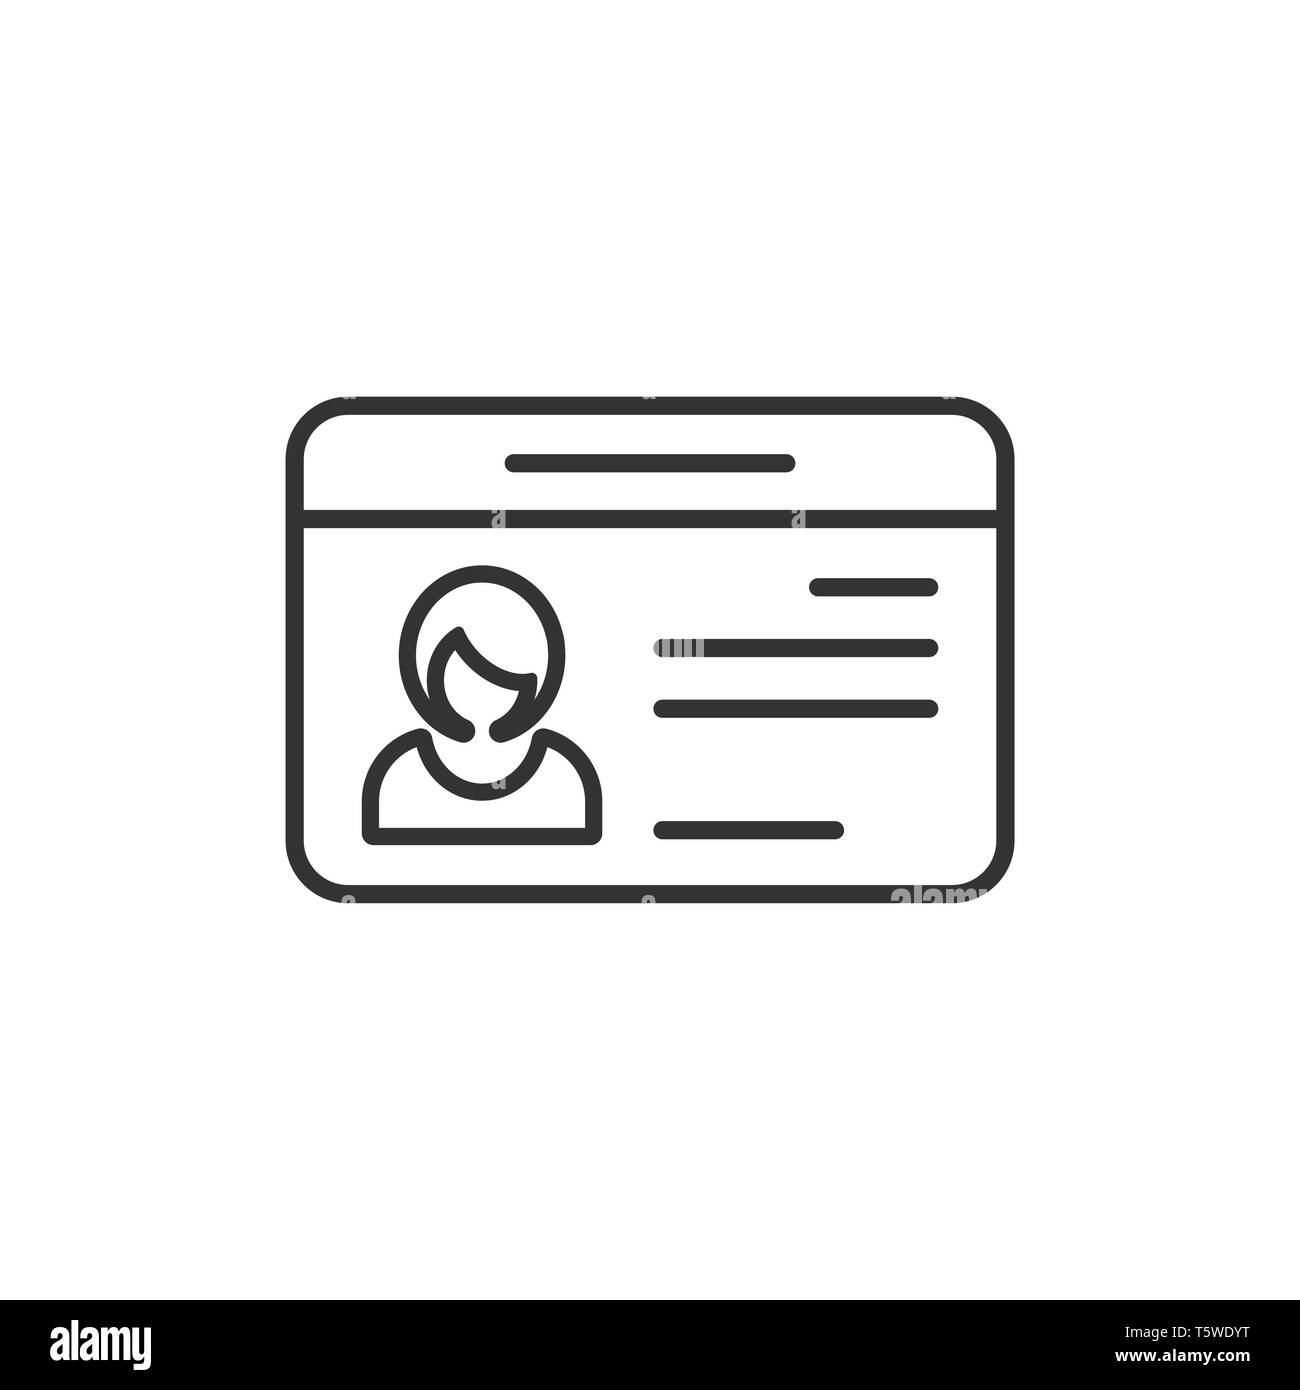 Identification card icon. Id card icon in flat style. Vector illustration  Stock Vector